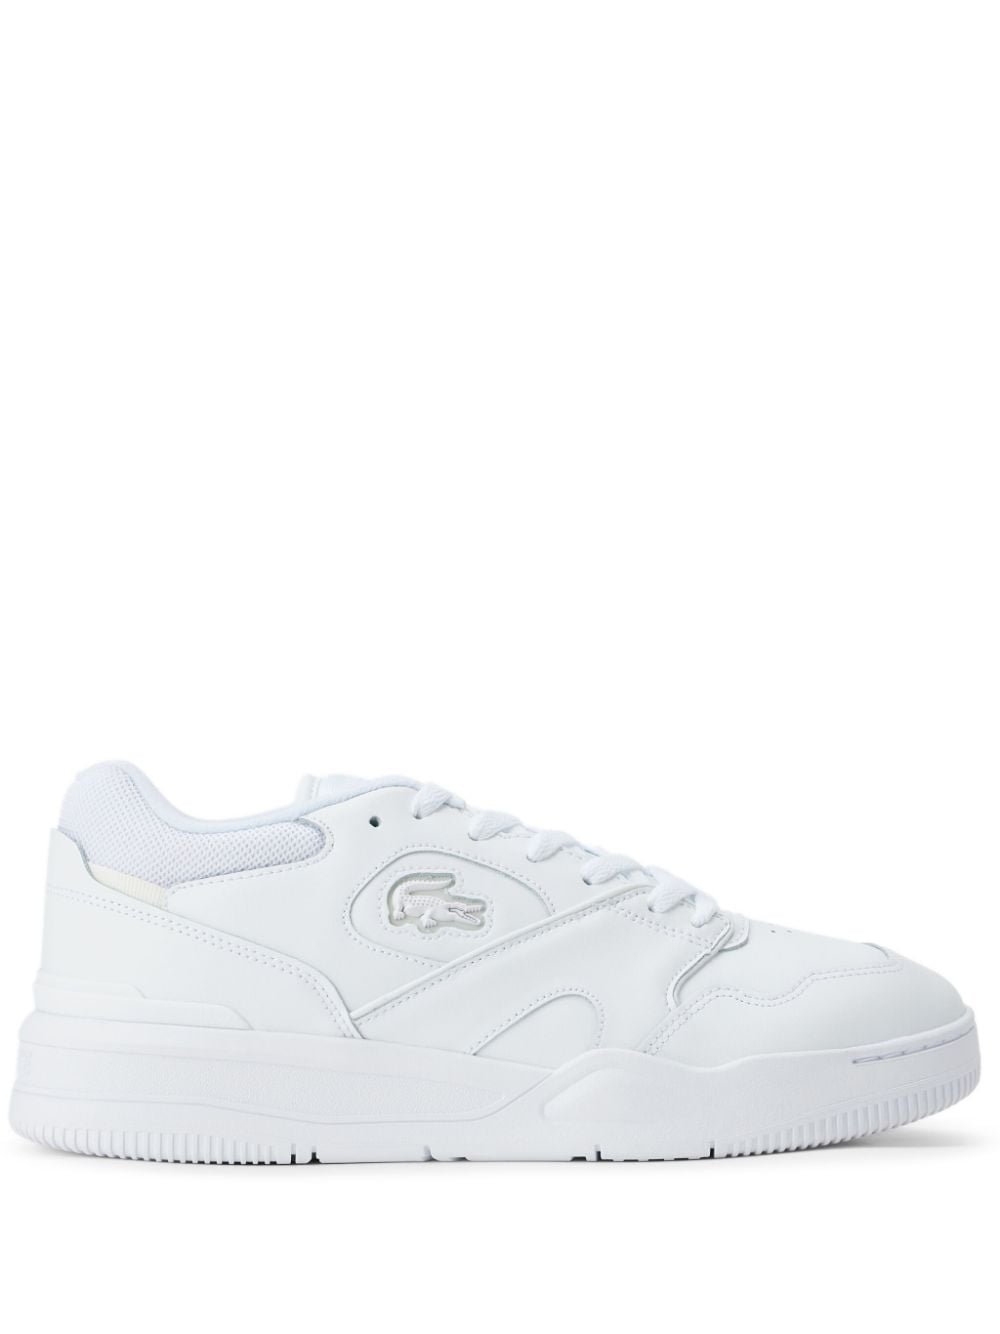 Lacoste Lineshot leather sneakers - White von Lacoste